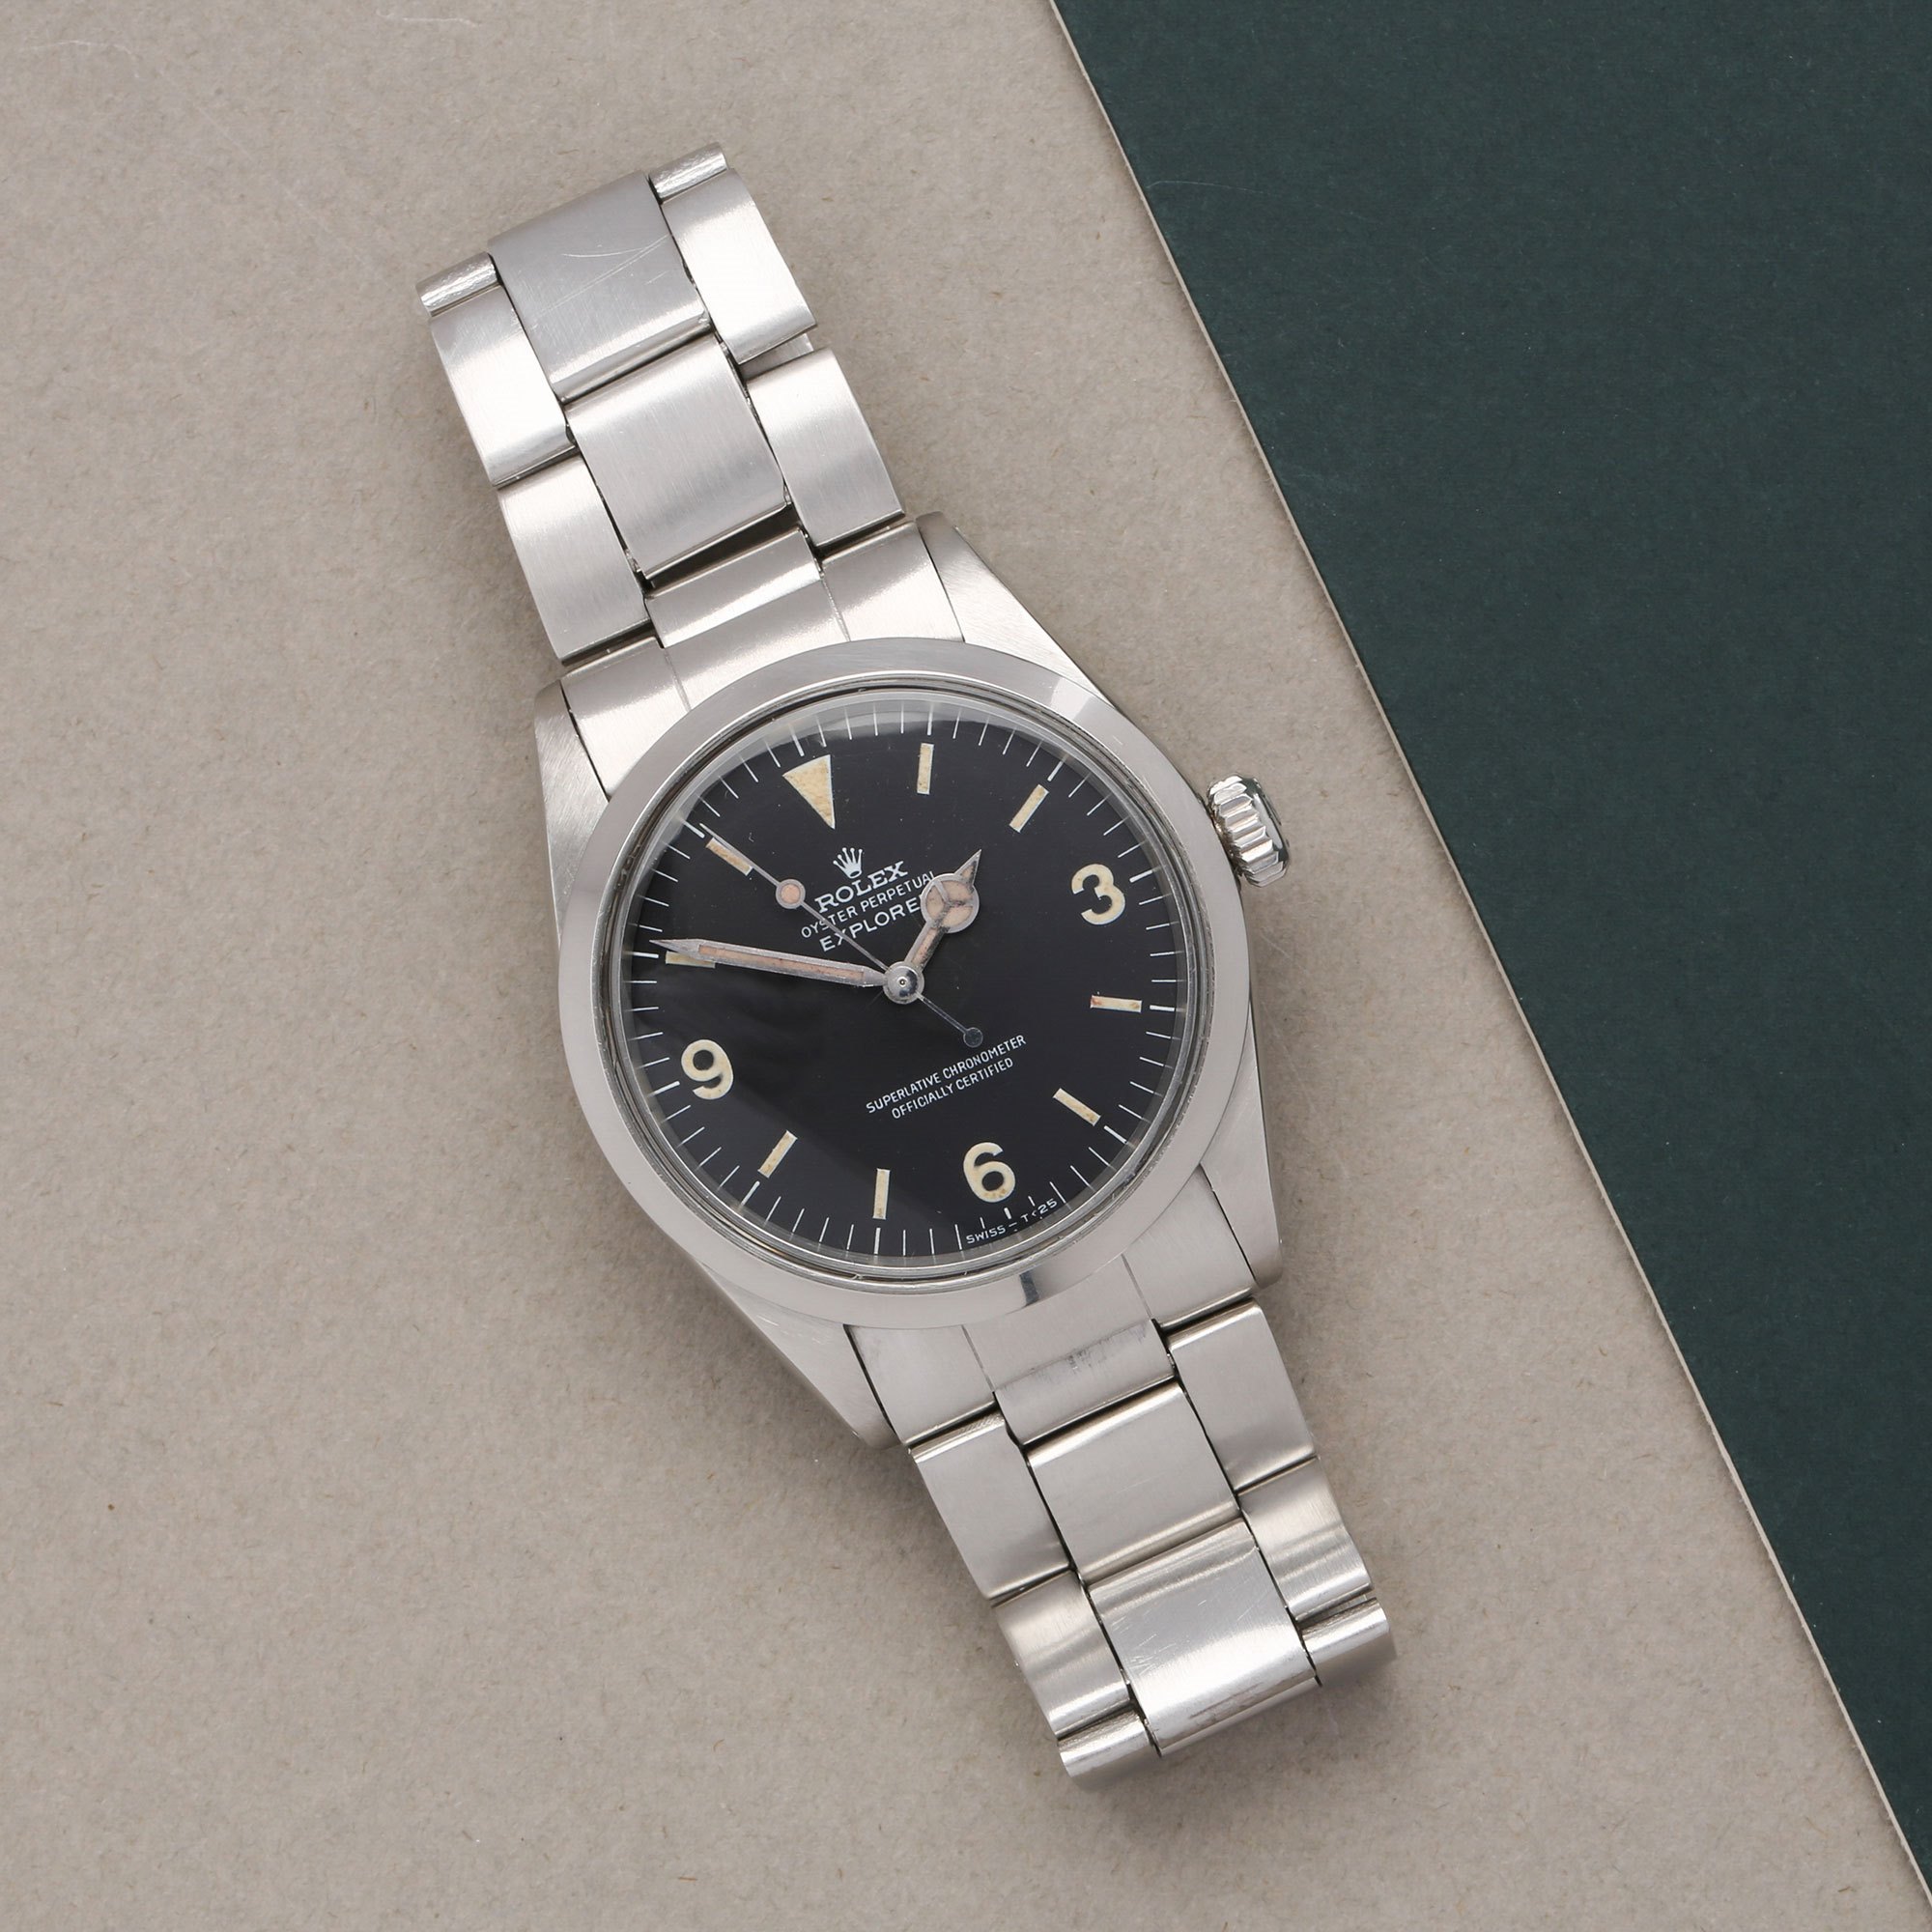 Rolex Explorer I Stainless Steel - 1016 Roestvrij Staal 1016